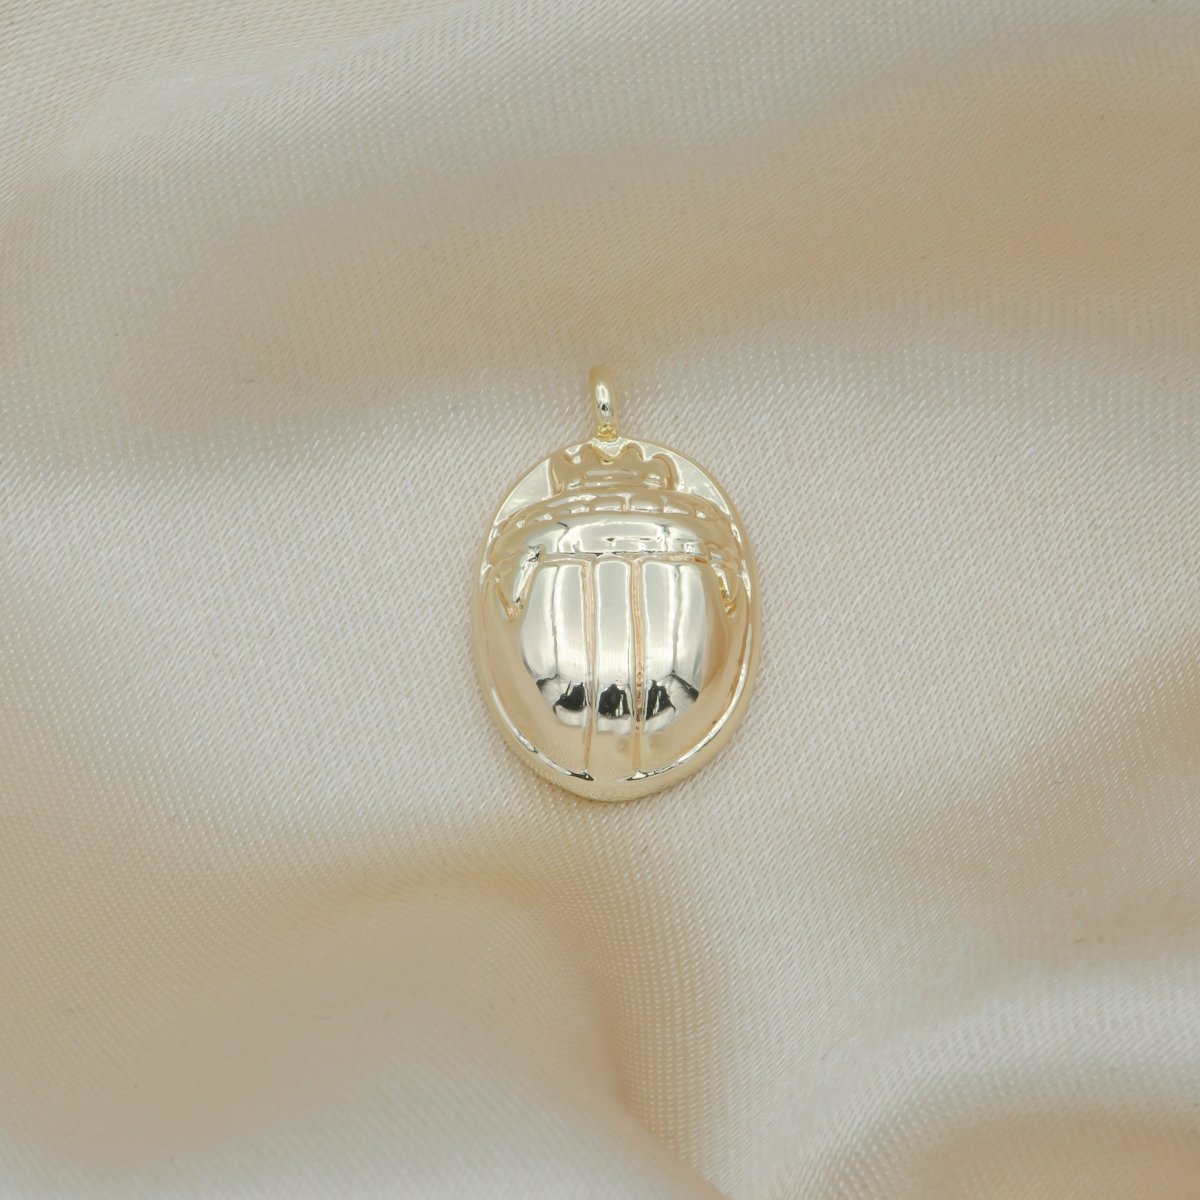 Dainty Simple Plain Gold Ornament Crafted Charm, Gold Plated Geometric Oval Shape Charm Pendant GP-138 - DLUXCA